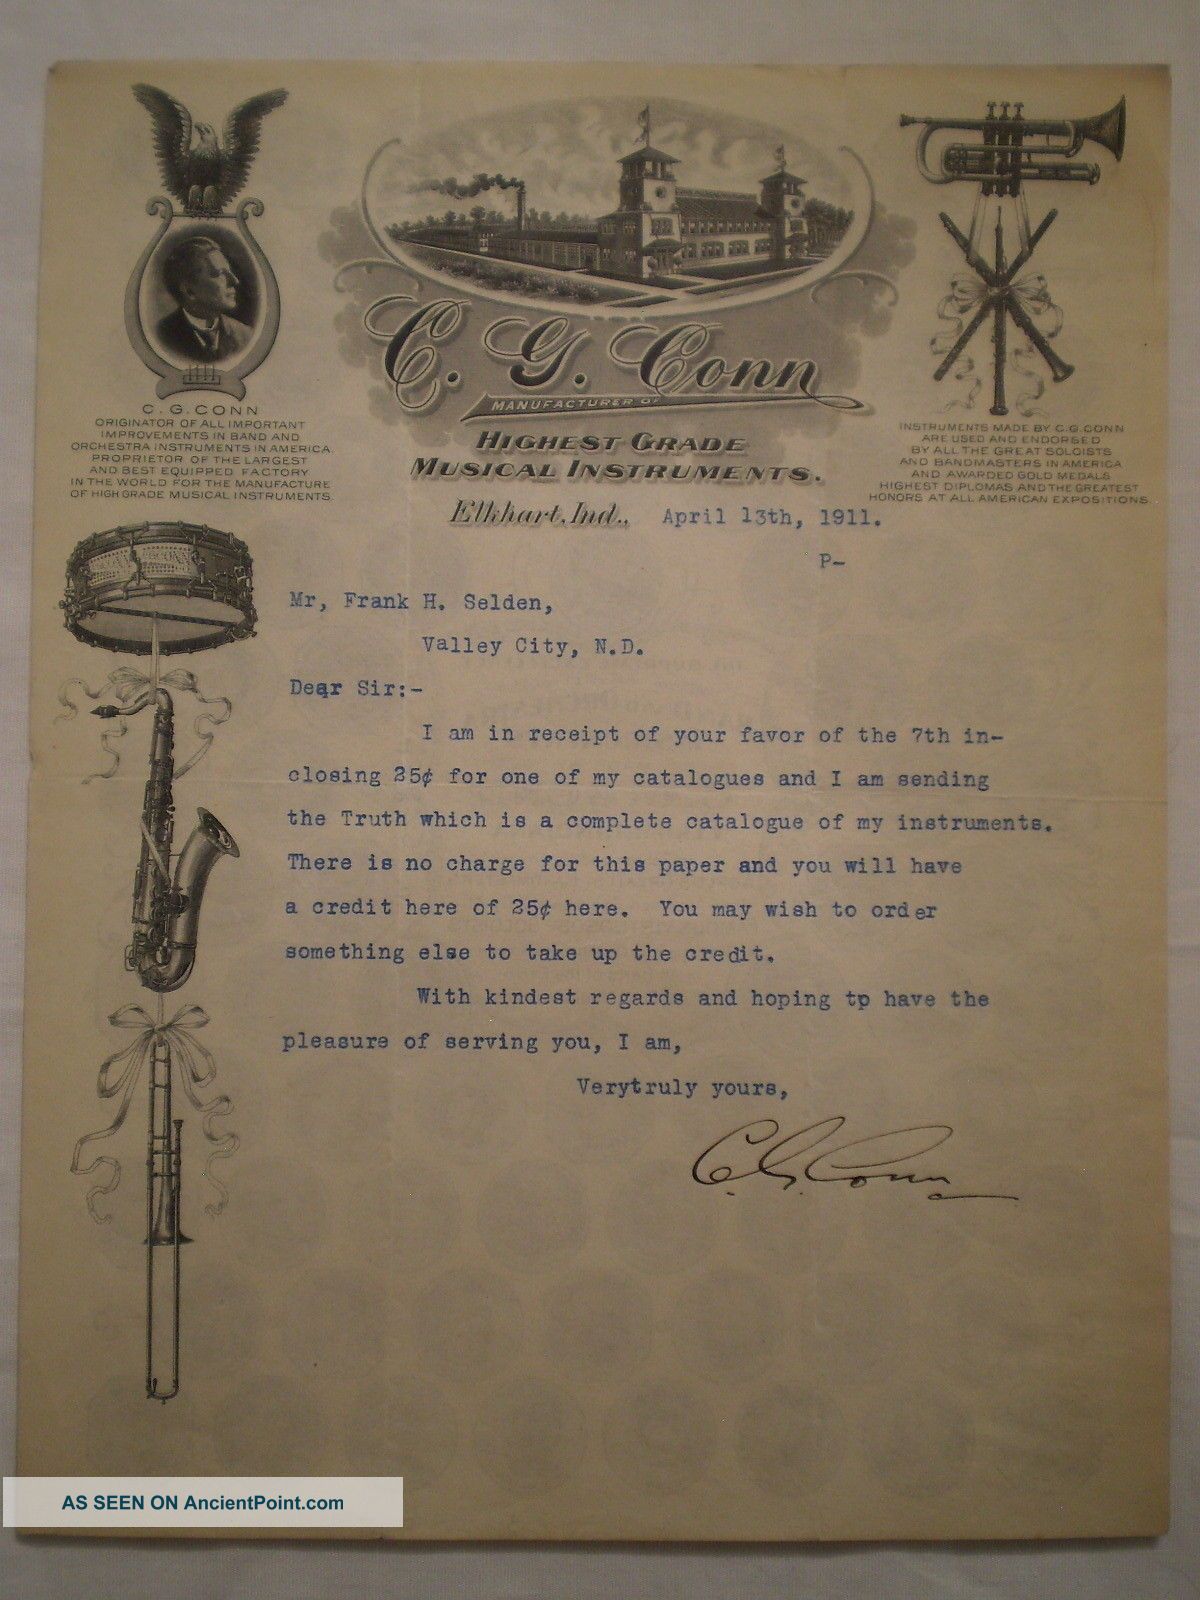 Antique 1911 Handsigned C G Conn Signature Letterhead Musical Instrument Graphic Other photo